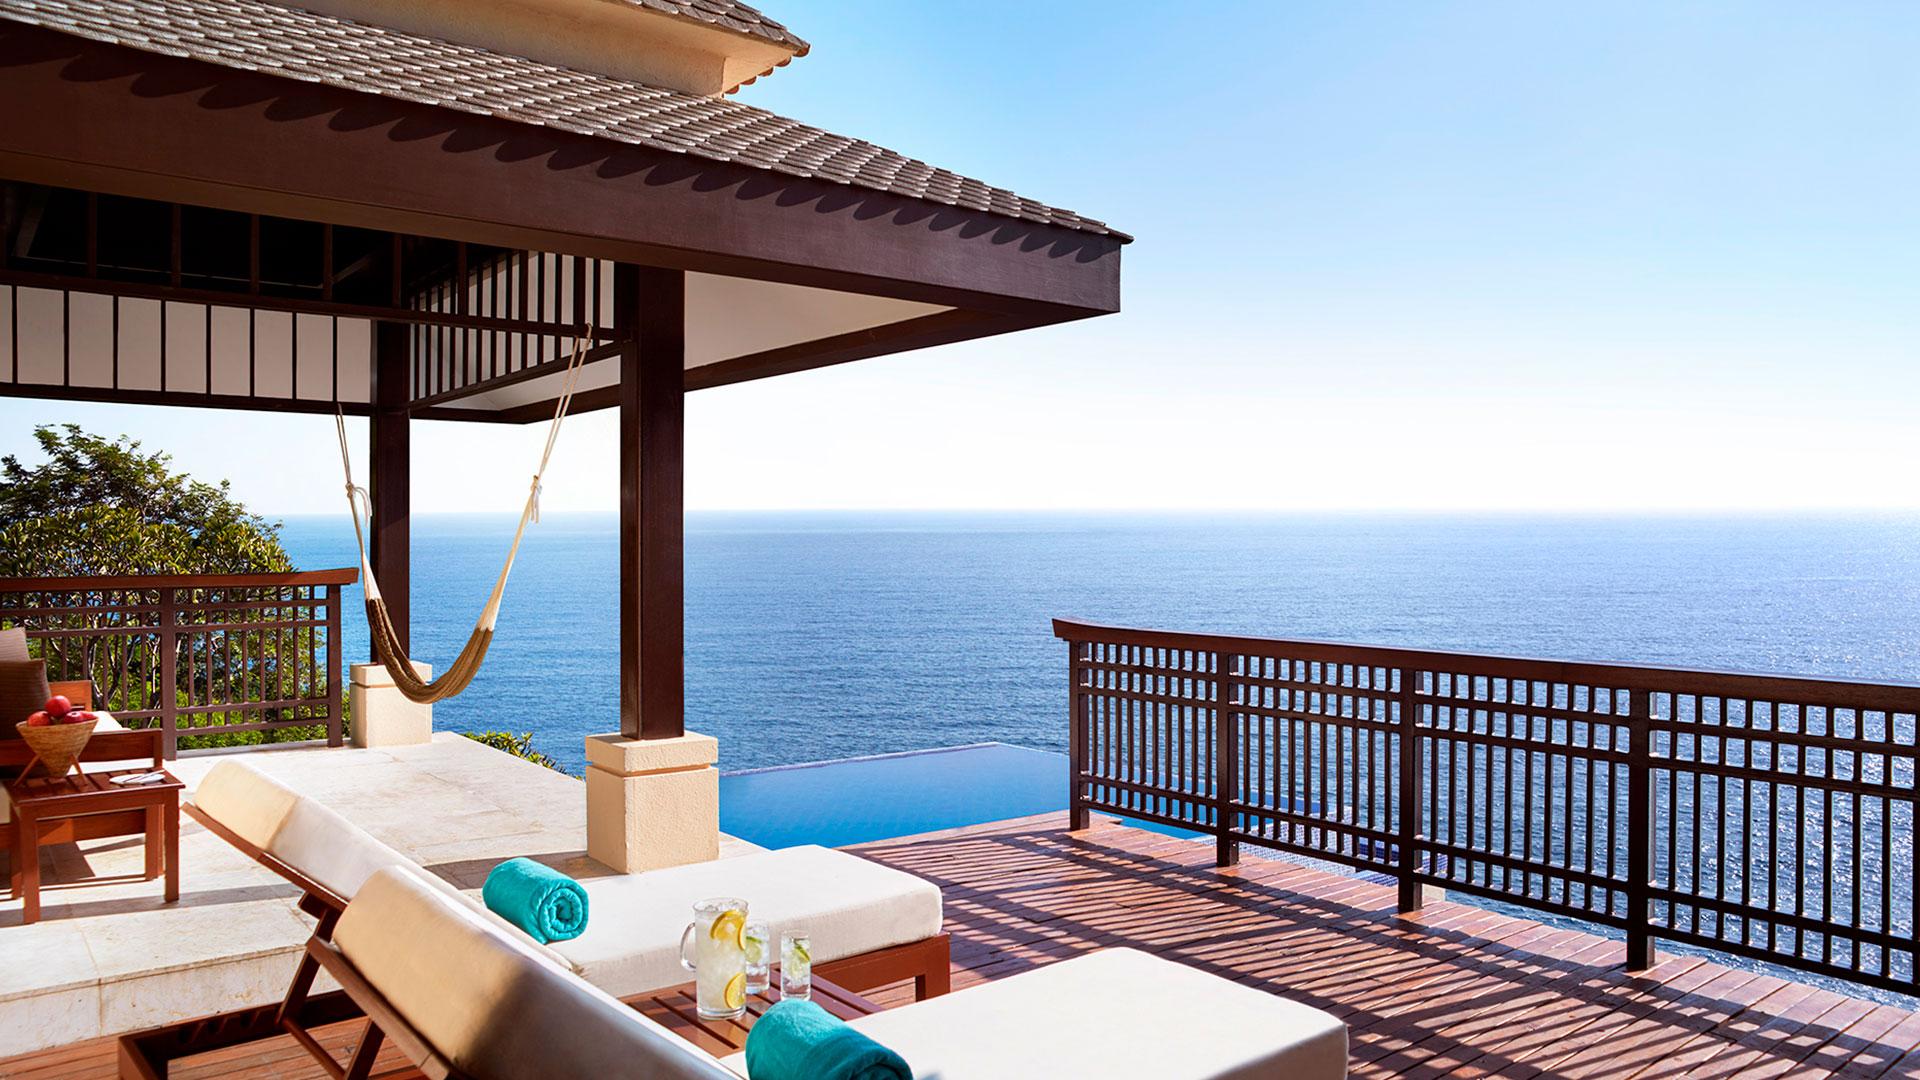 Banyan Tree Mexico Cabo Marques Accommodation - Oceanfront Pool Villa